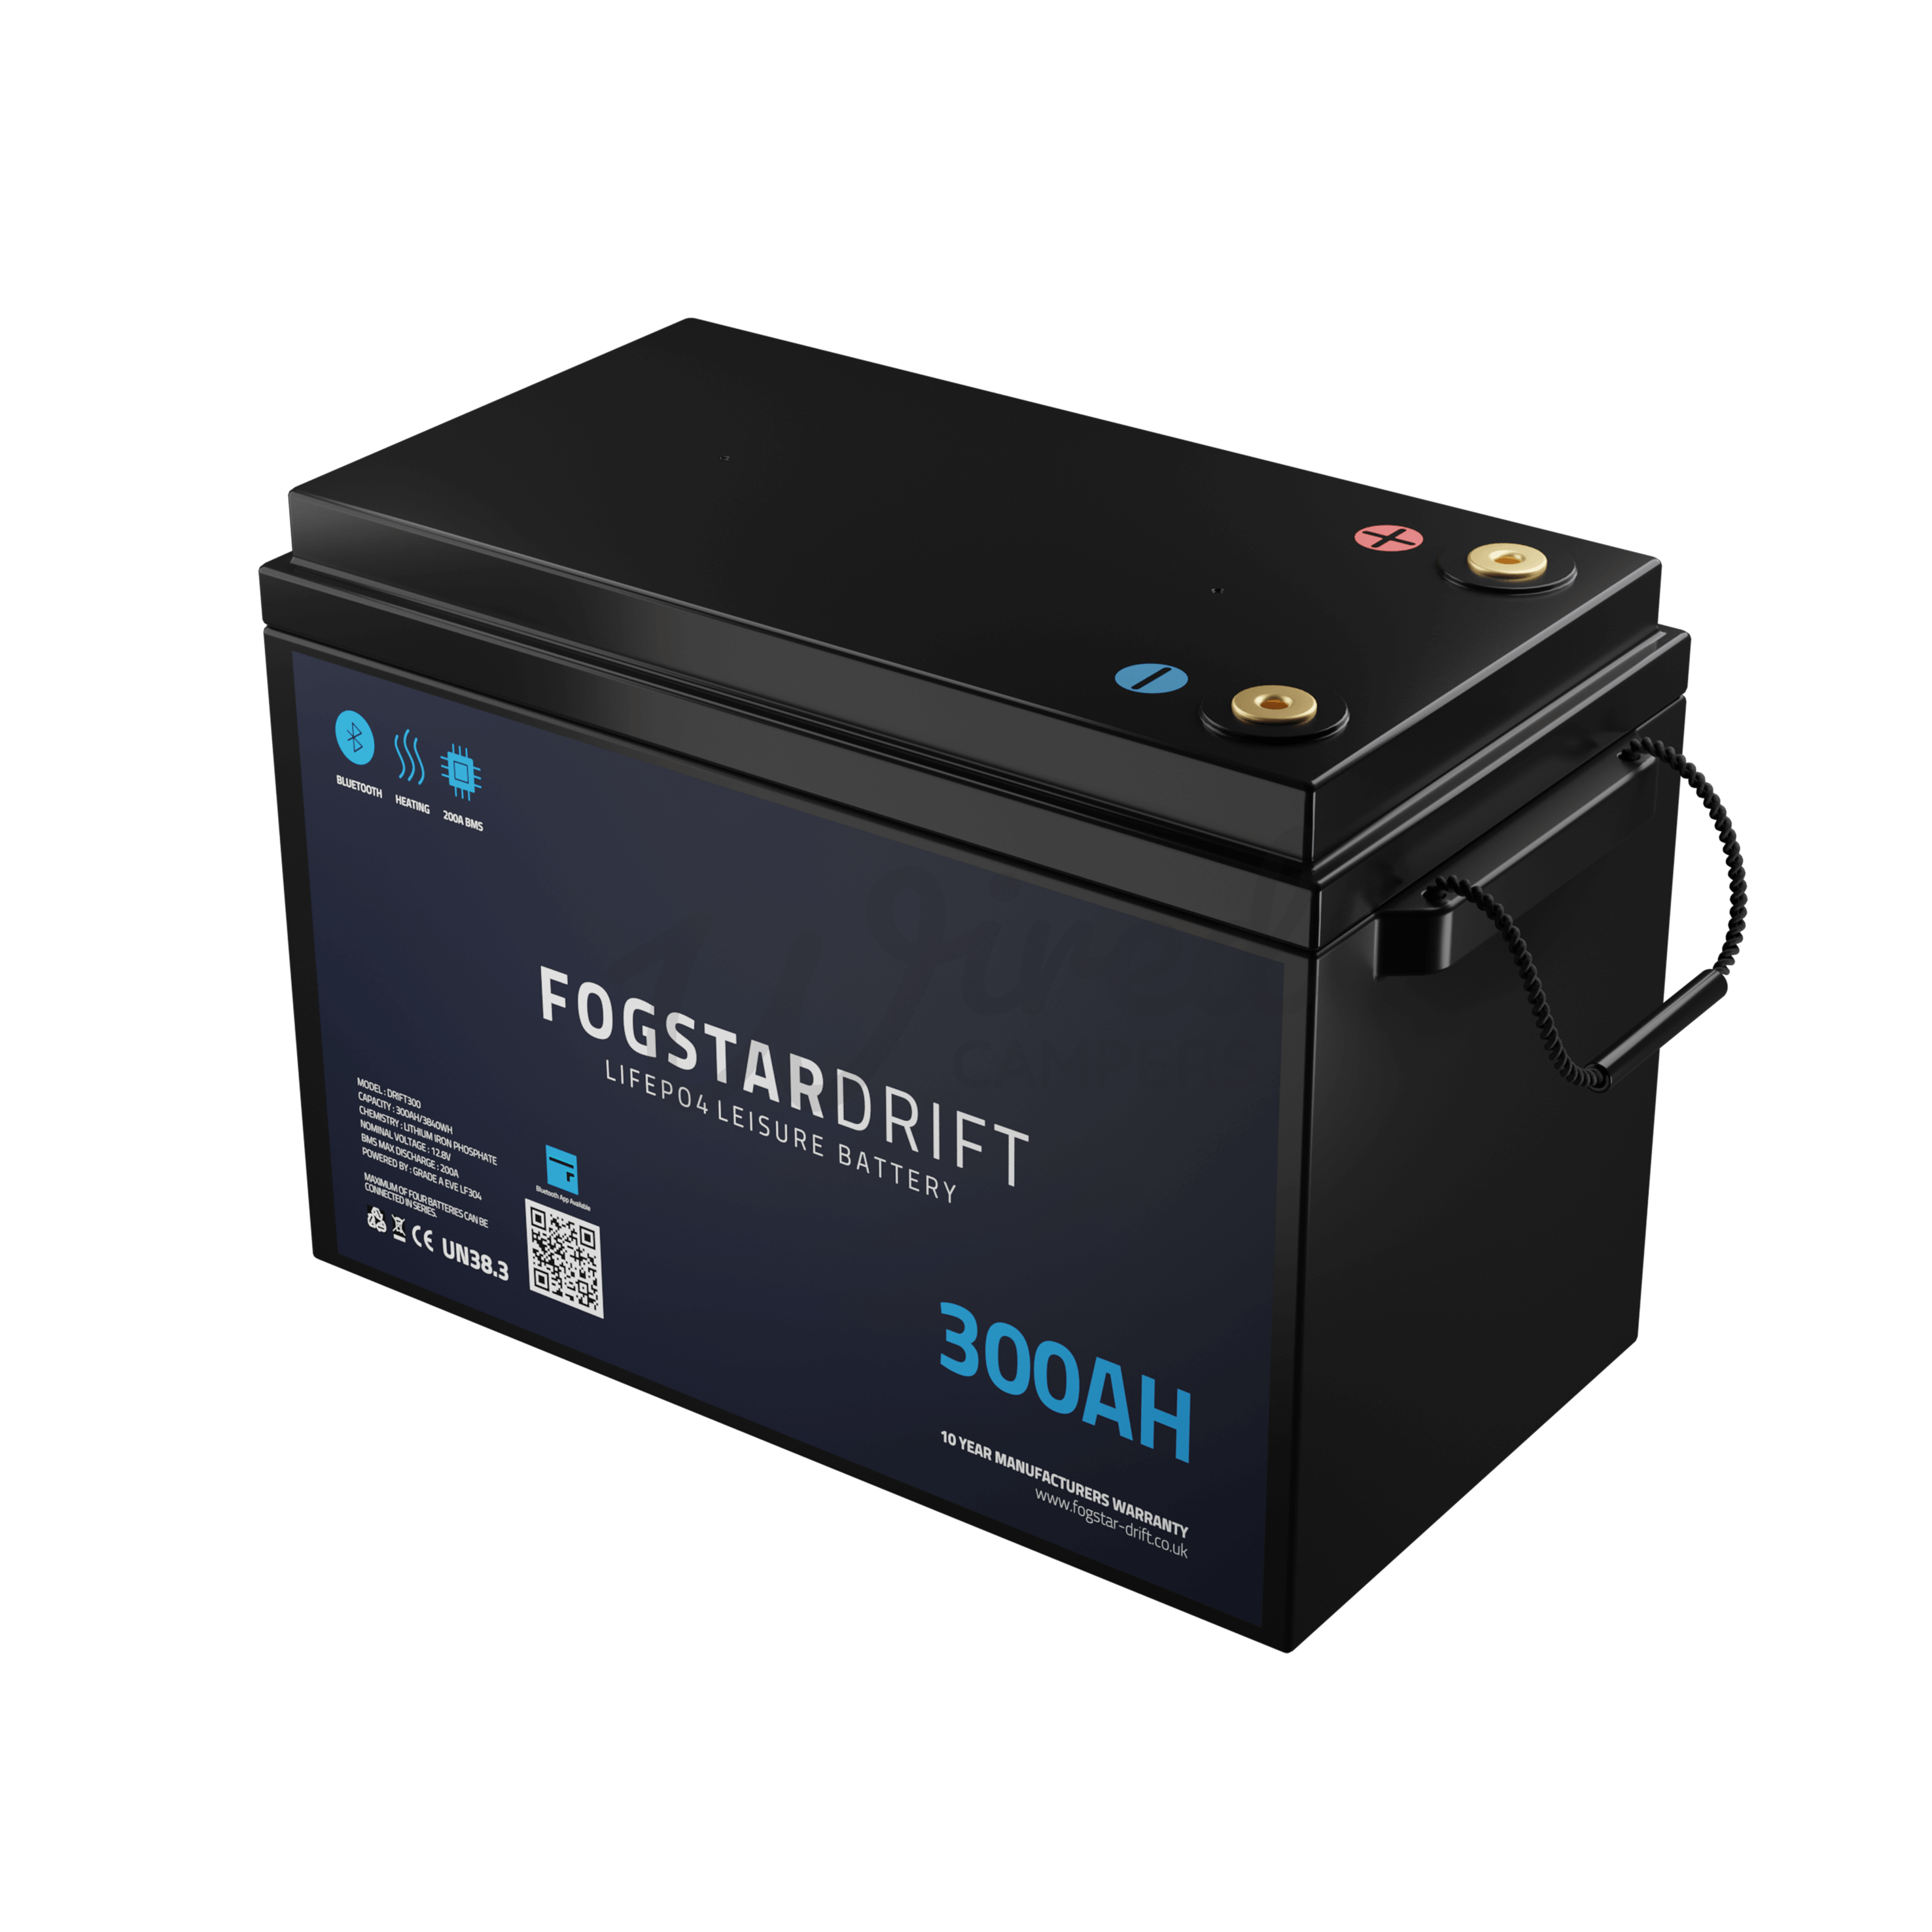 Wired Campers Limited Fogstar Drift 12V 300AH Heated Lithium LiFePO4 Leisure Battery